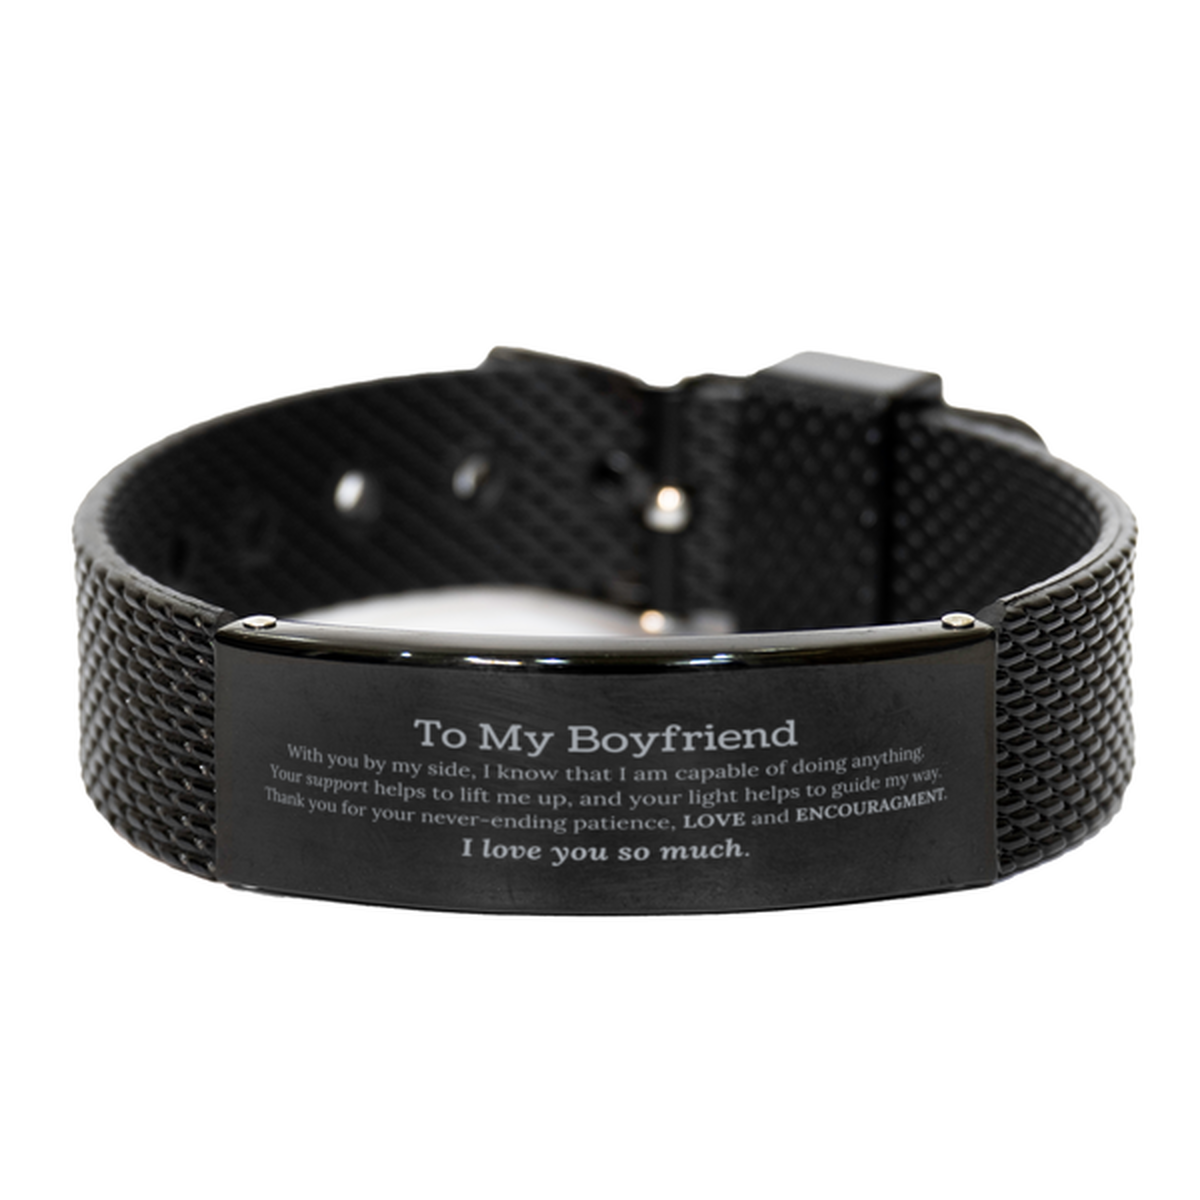 Appreciation Boyfriend Black Shark Mesh Bracelet Gifts, To My Boyfriend Birthday Christmas Wedding Keepsake Gifts for Boyfriend With you by my side, I know that I am capable of doing anything. I love you so much